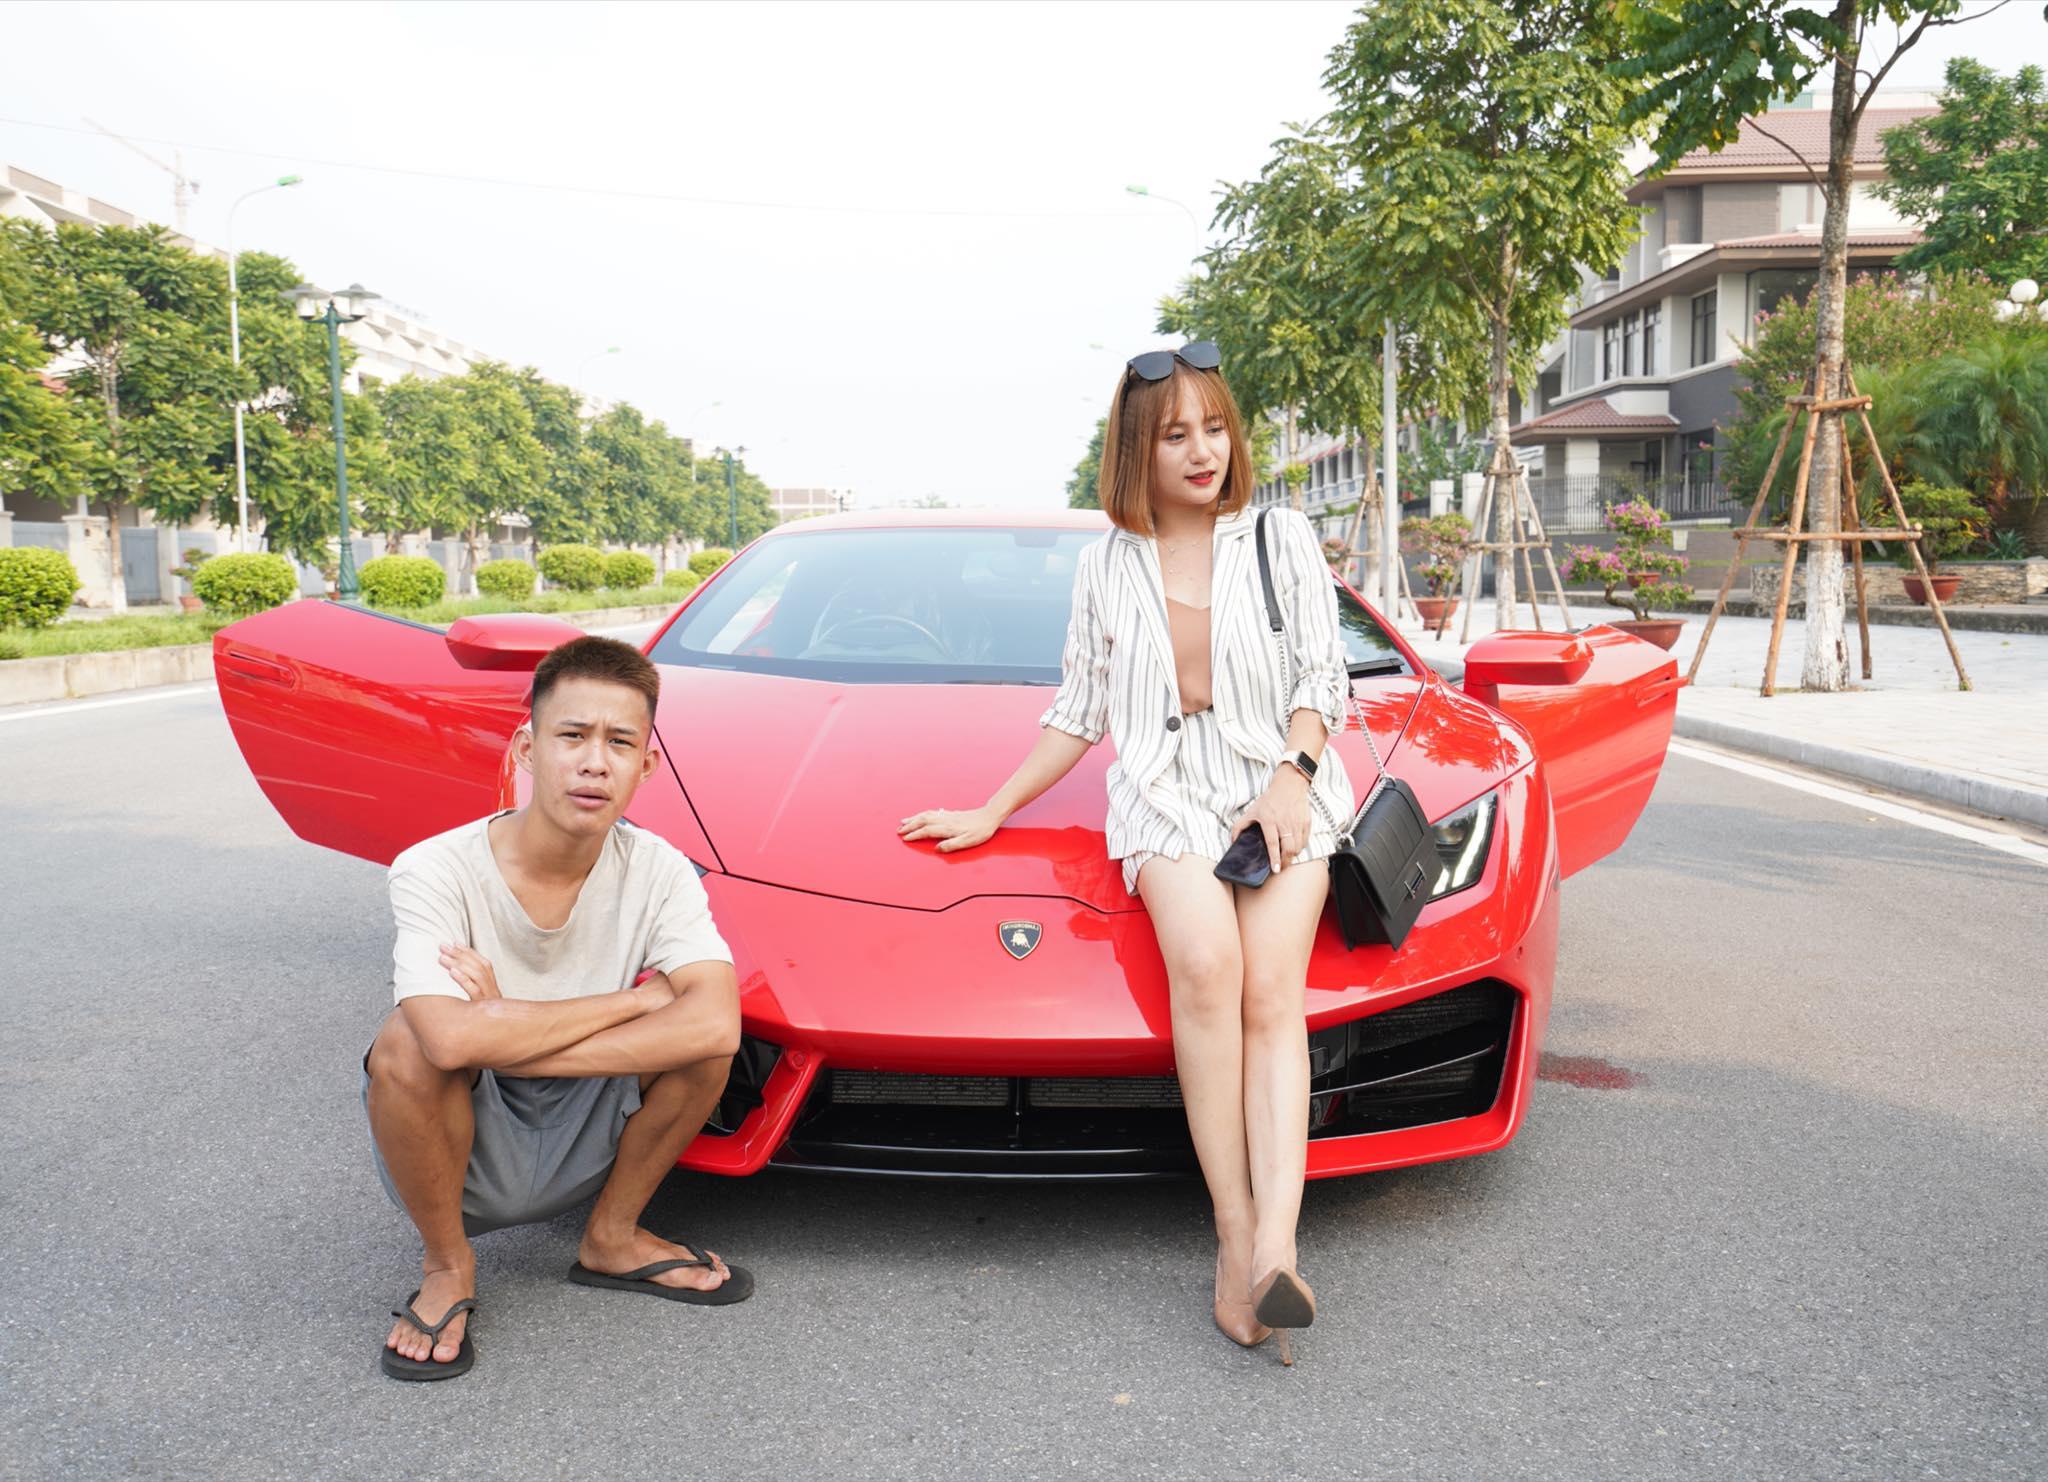  A picture of a Stork Youtuber with a supercar